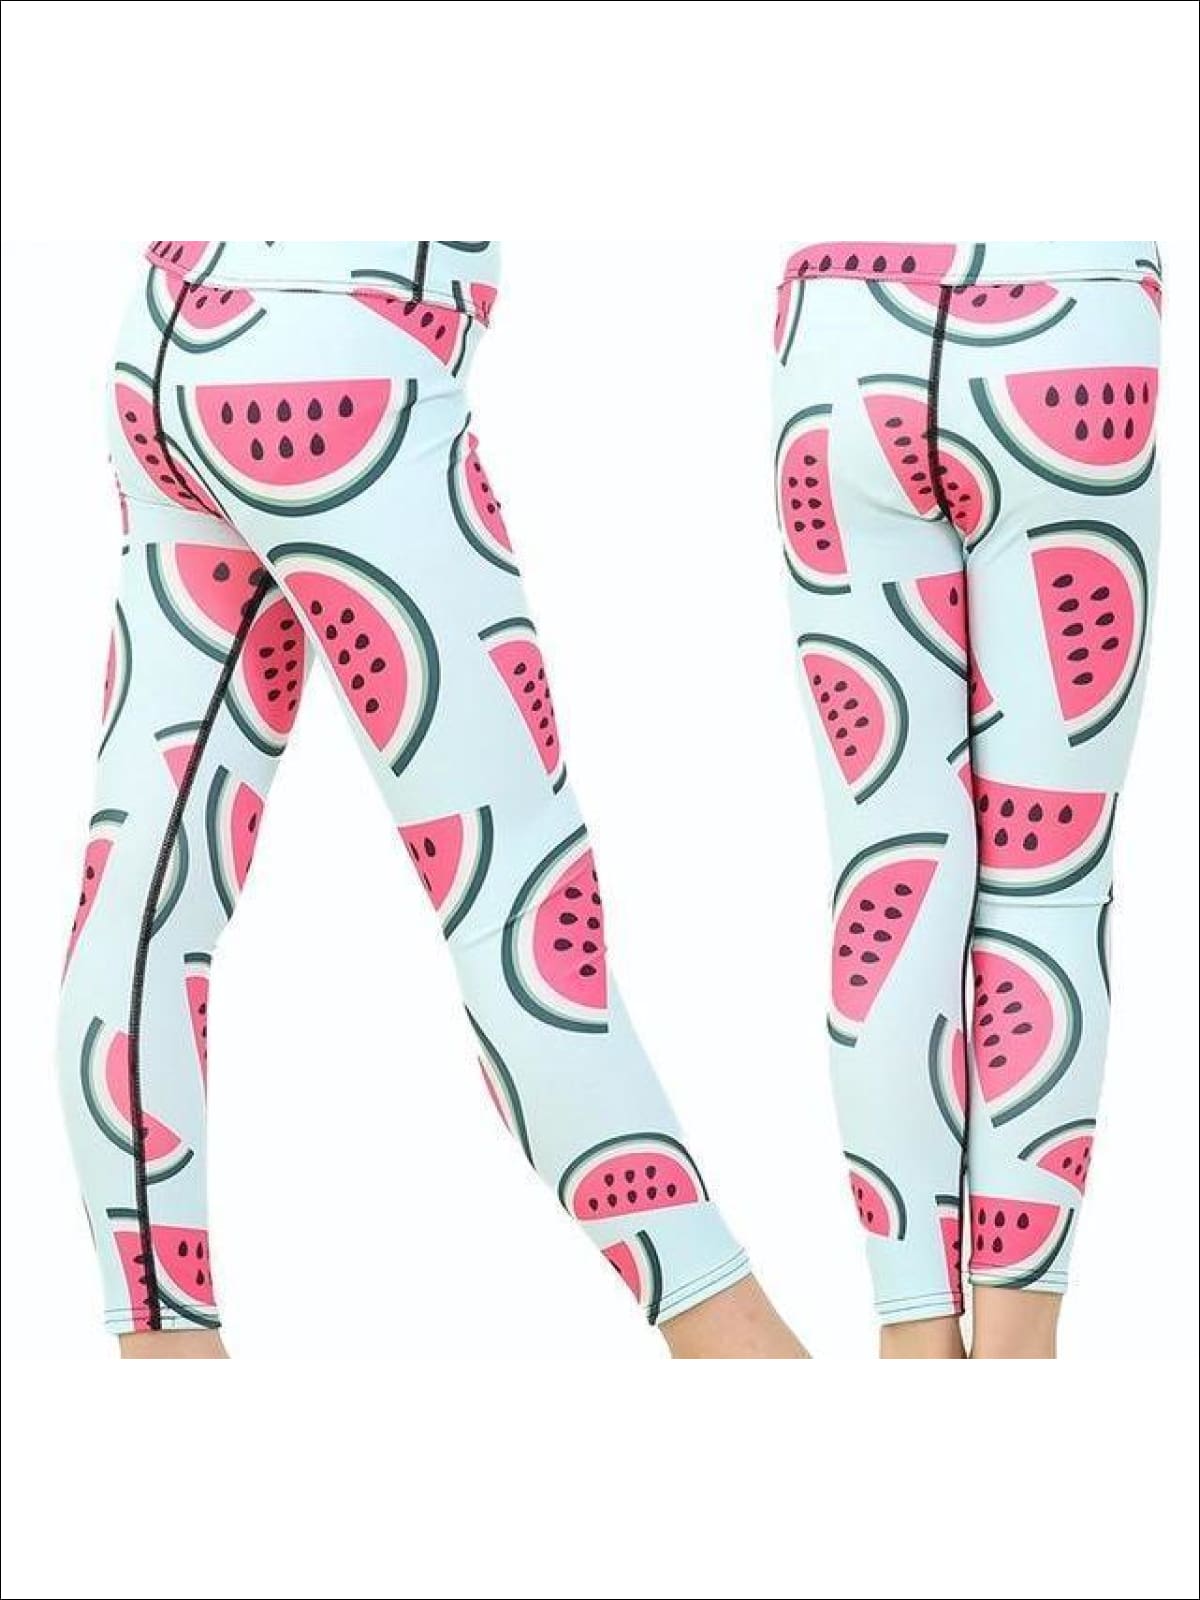 Girls Striped Unicorn Leggings (11 Style Options) - Watermelons / 4T - 5Y / Similar to image - Yoga Pants